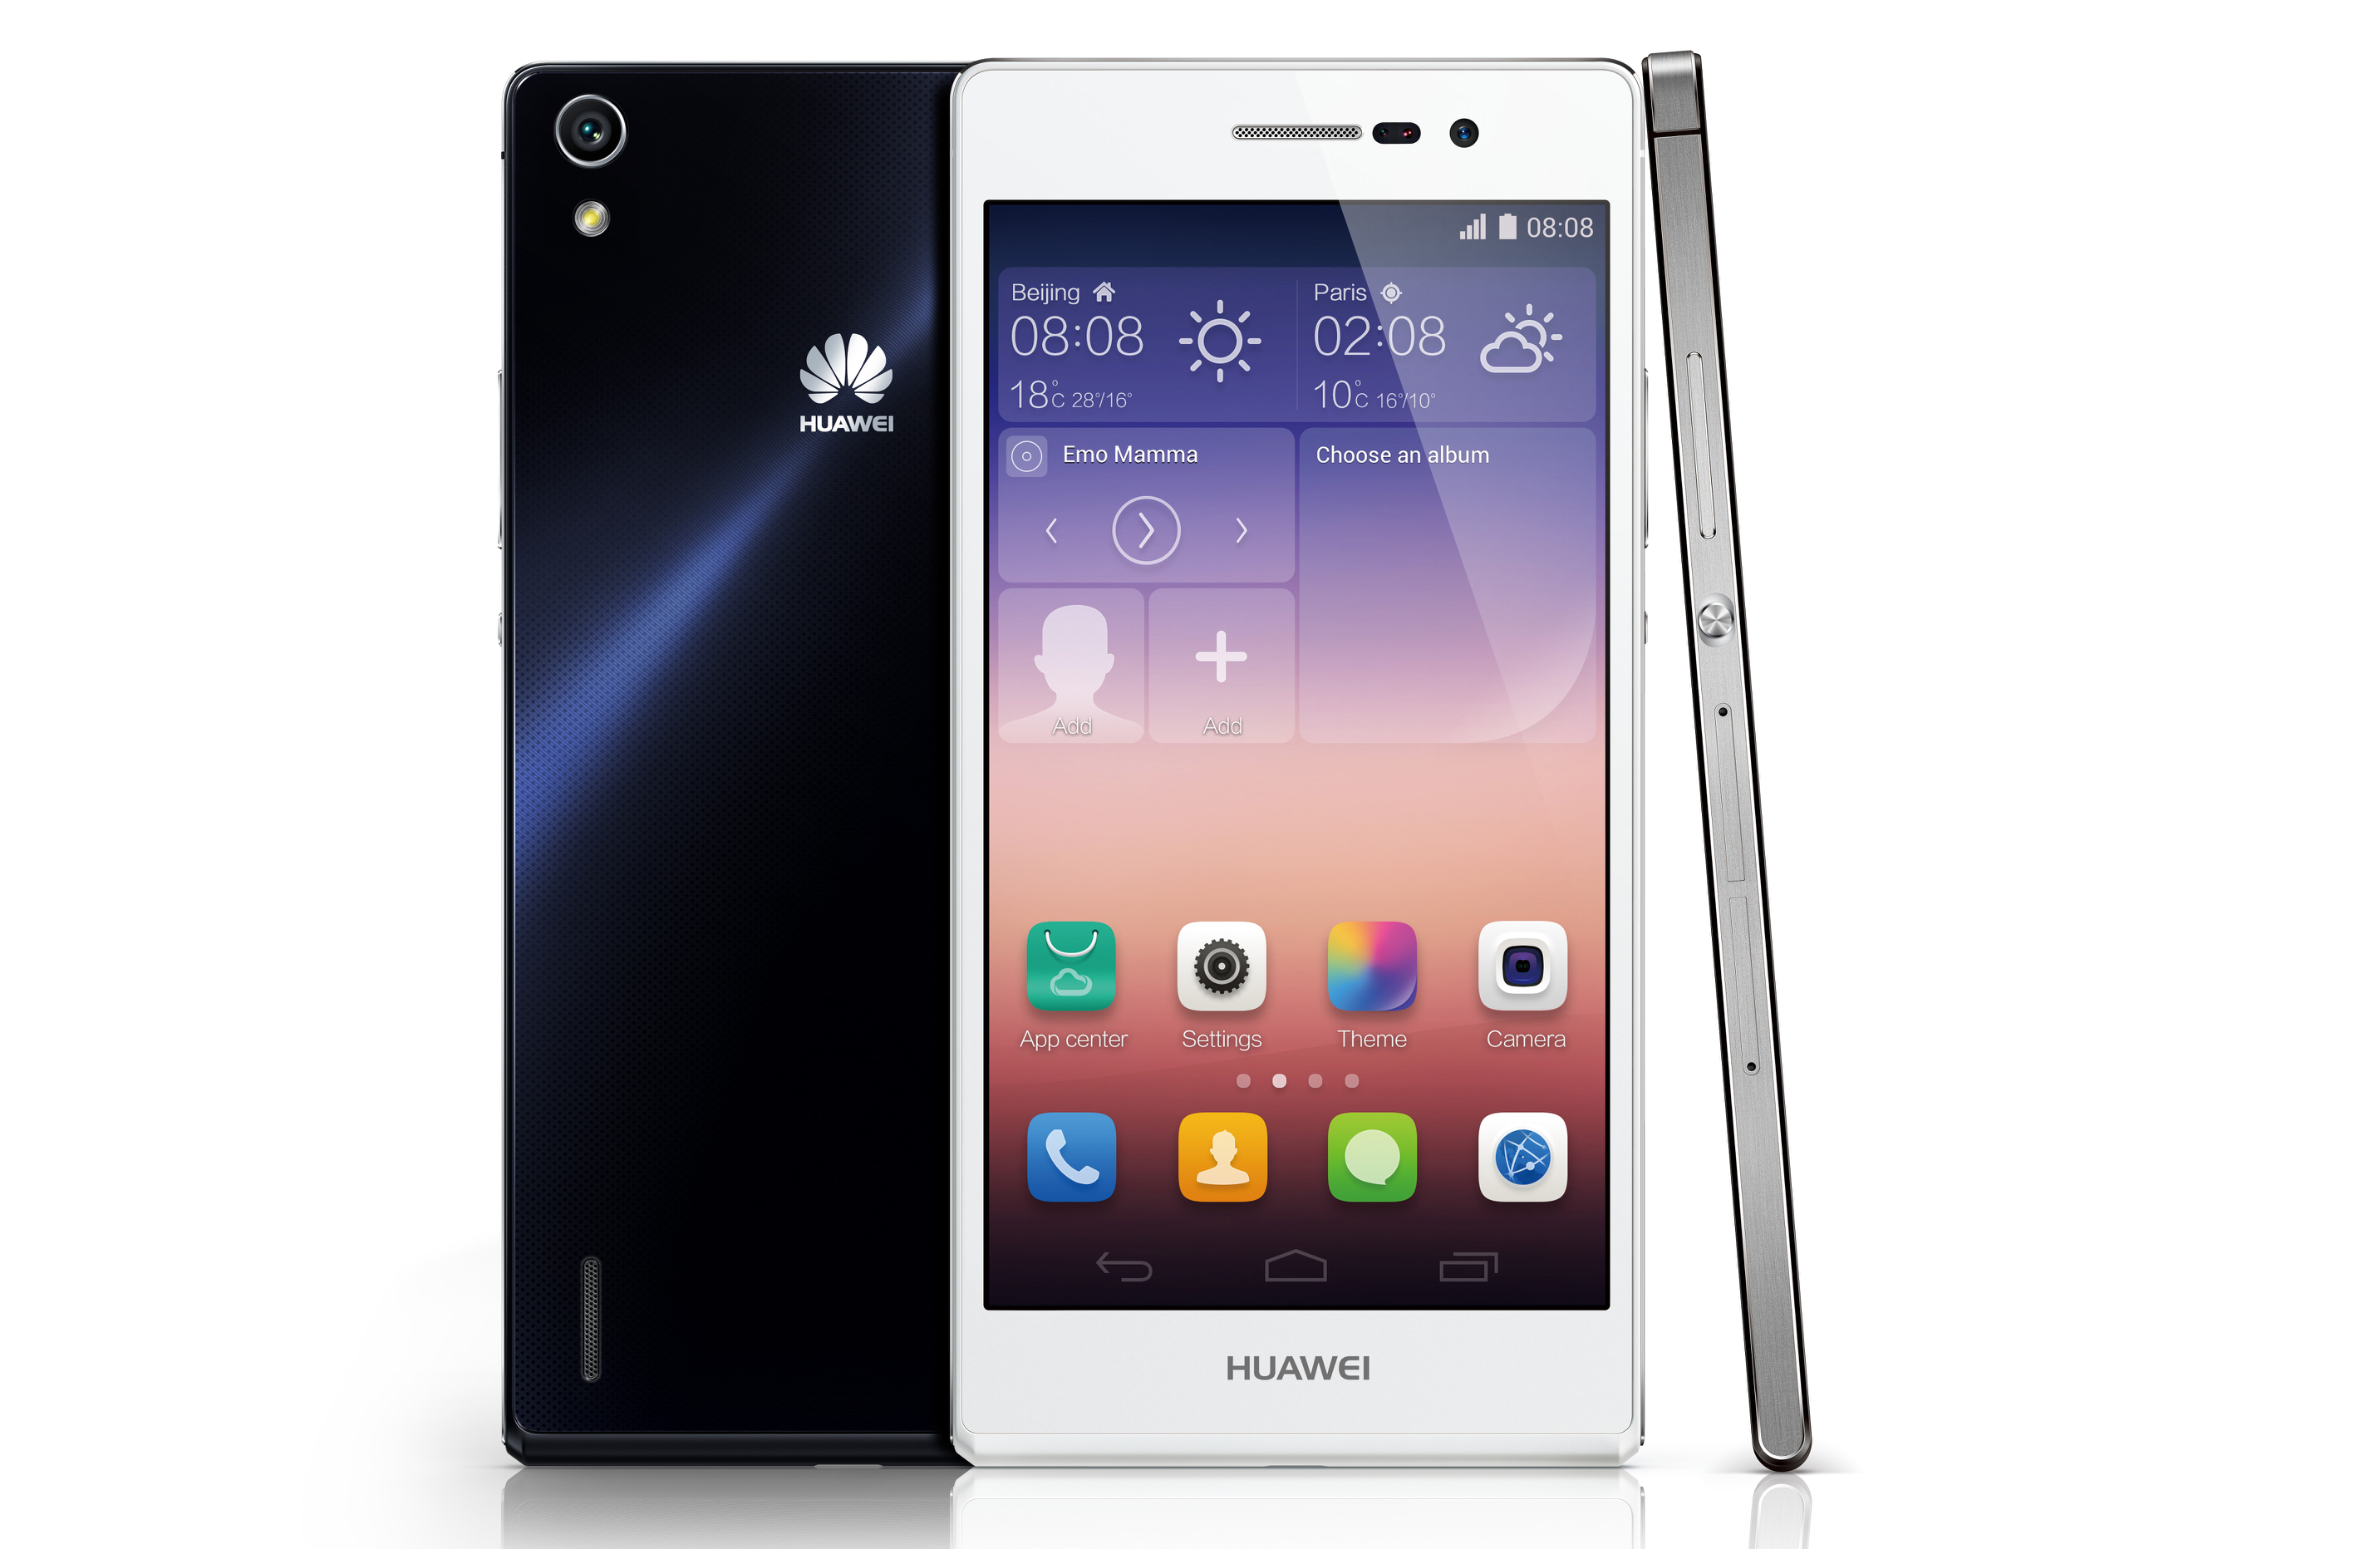 Huawei Ascend P7 is updated to Android 5.1.1 Lollipop 1